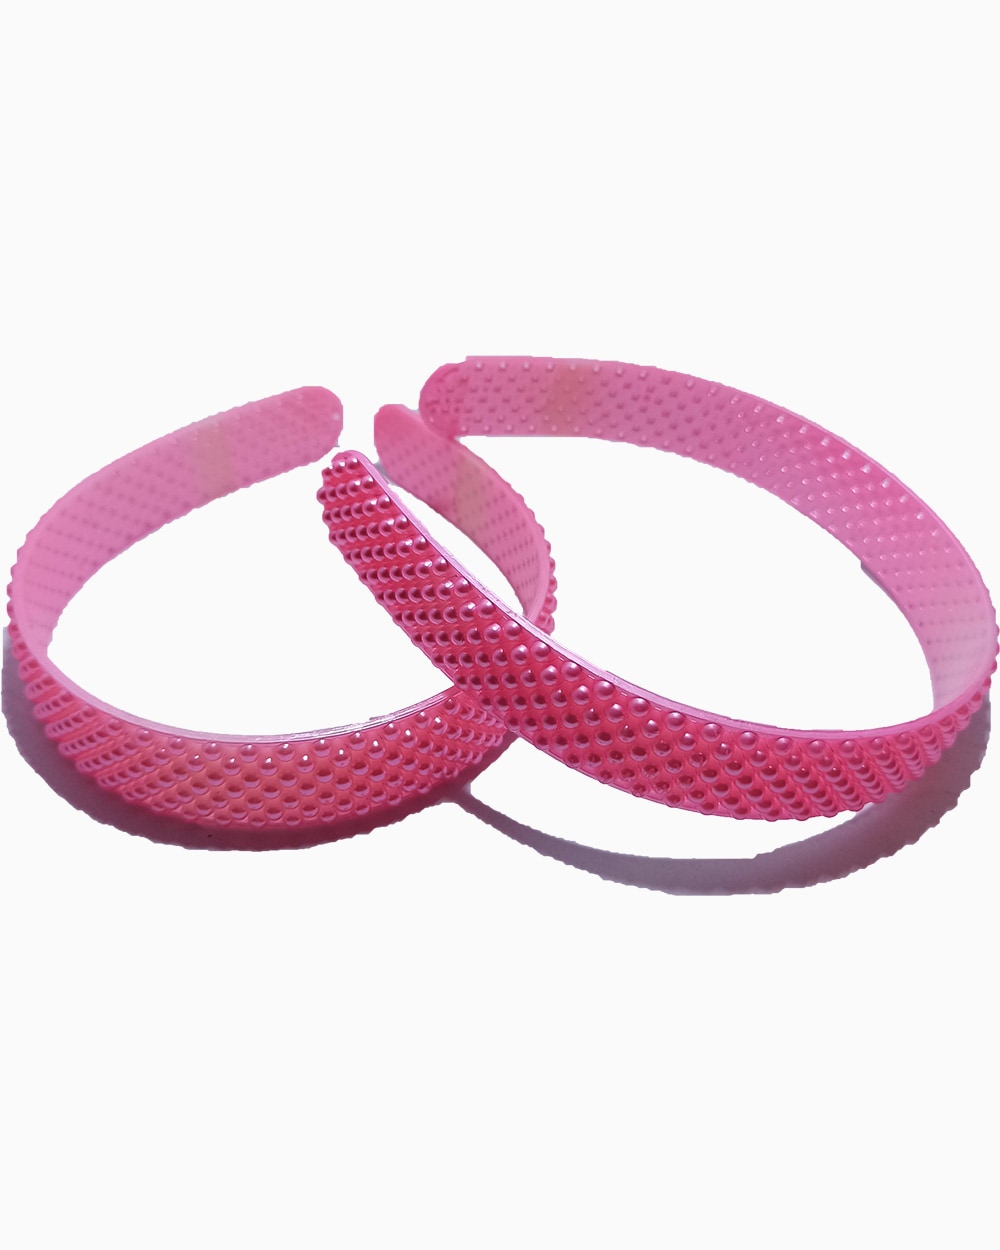 Buldging-Pop-Dotted-Plastic-Fancy-Hair-Clips-6-pink